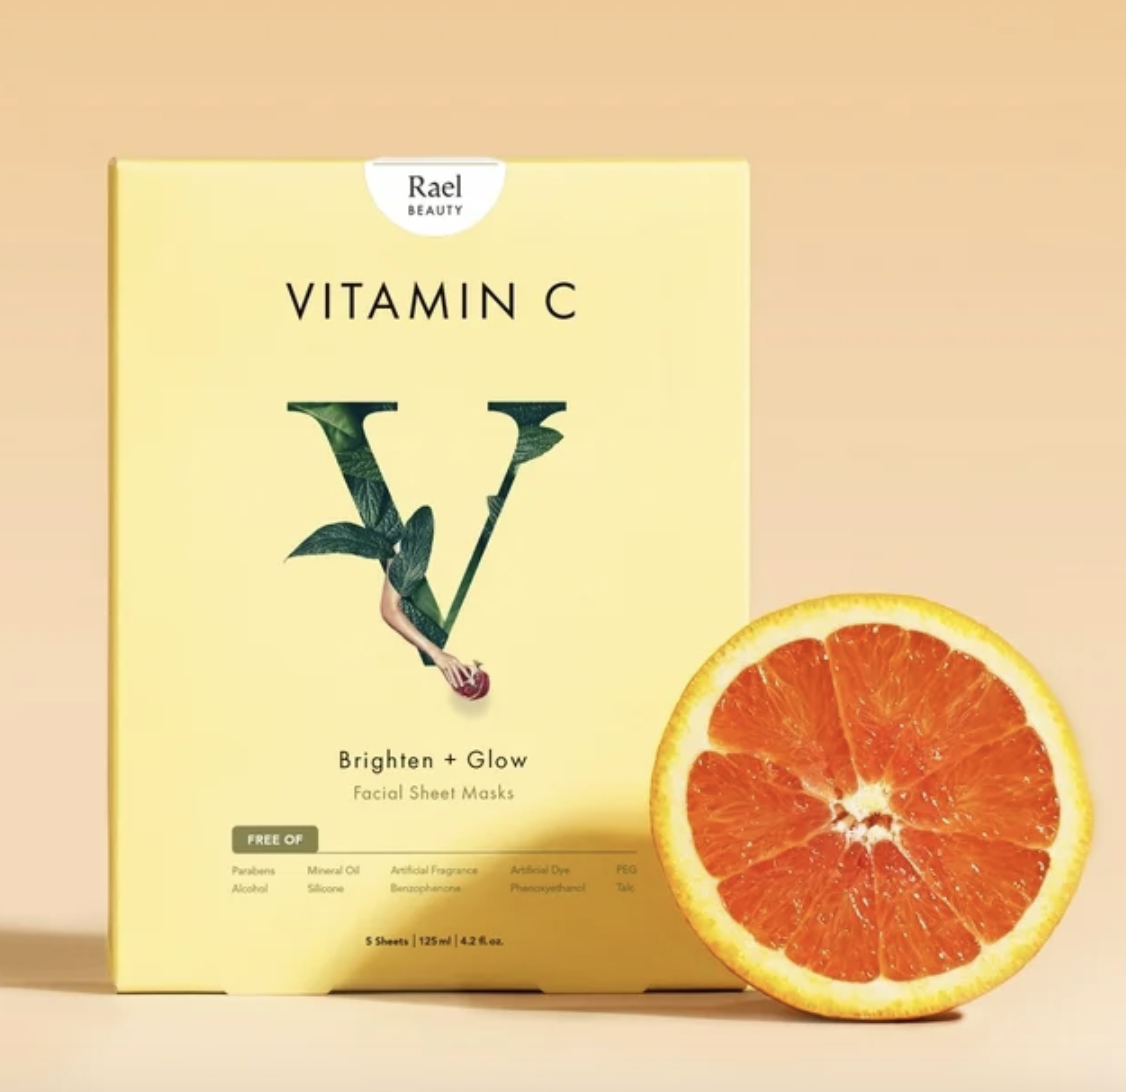 Packaging of Rael Beauty Vitamin C facial sheet masks with an orange slice beside it